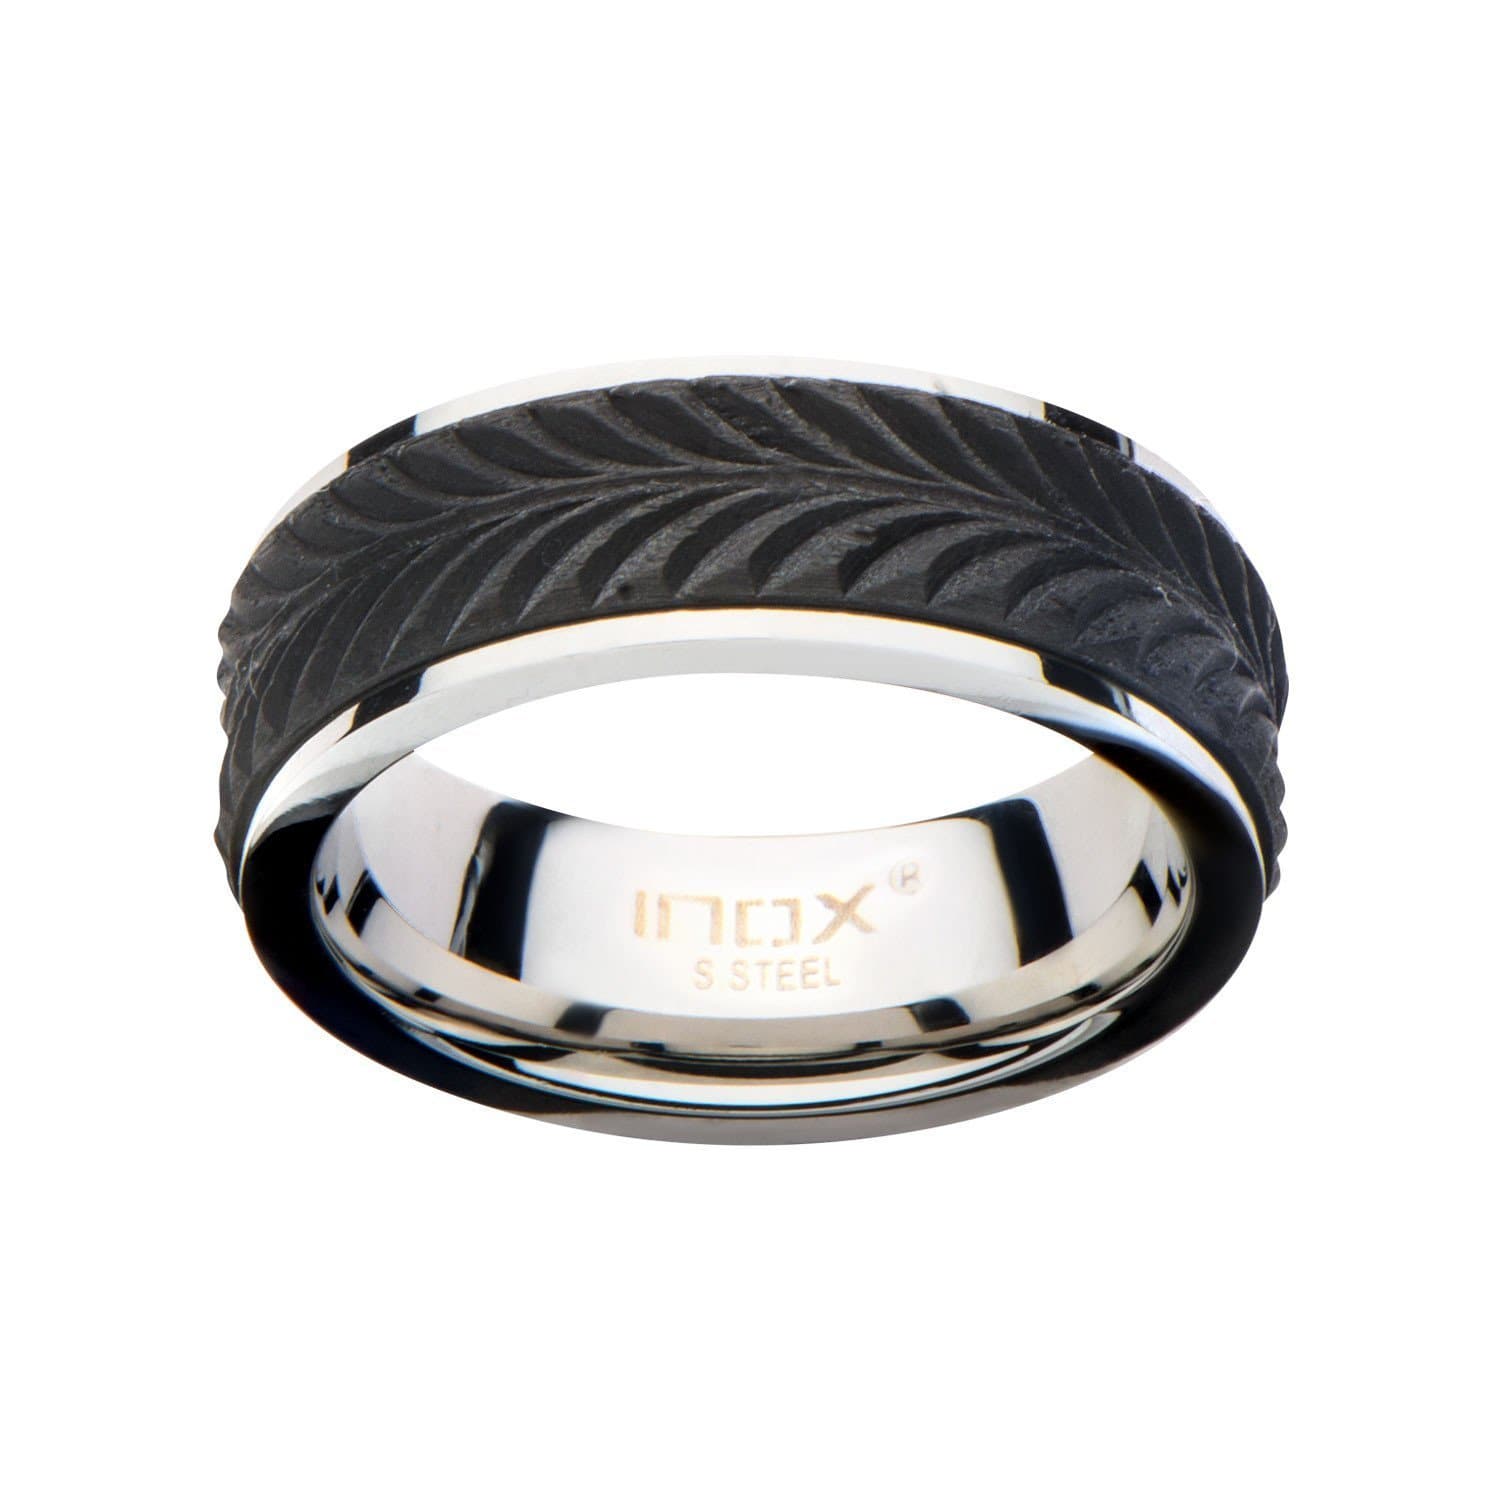 INOX JEWELRY Rings Silver Tone Stainless Steel Treated Solid Carbon Fiber Tire Patterned Band FR16R3